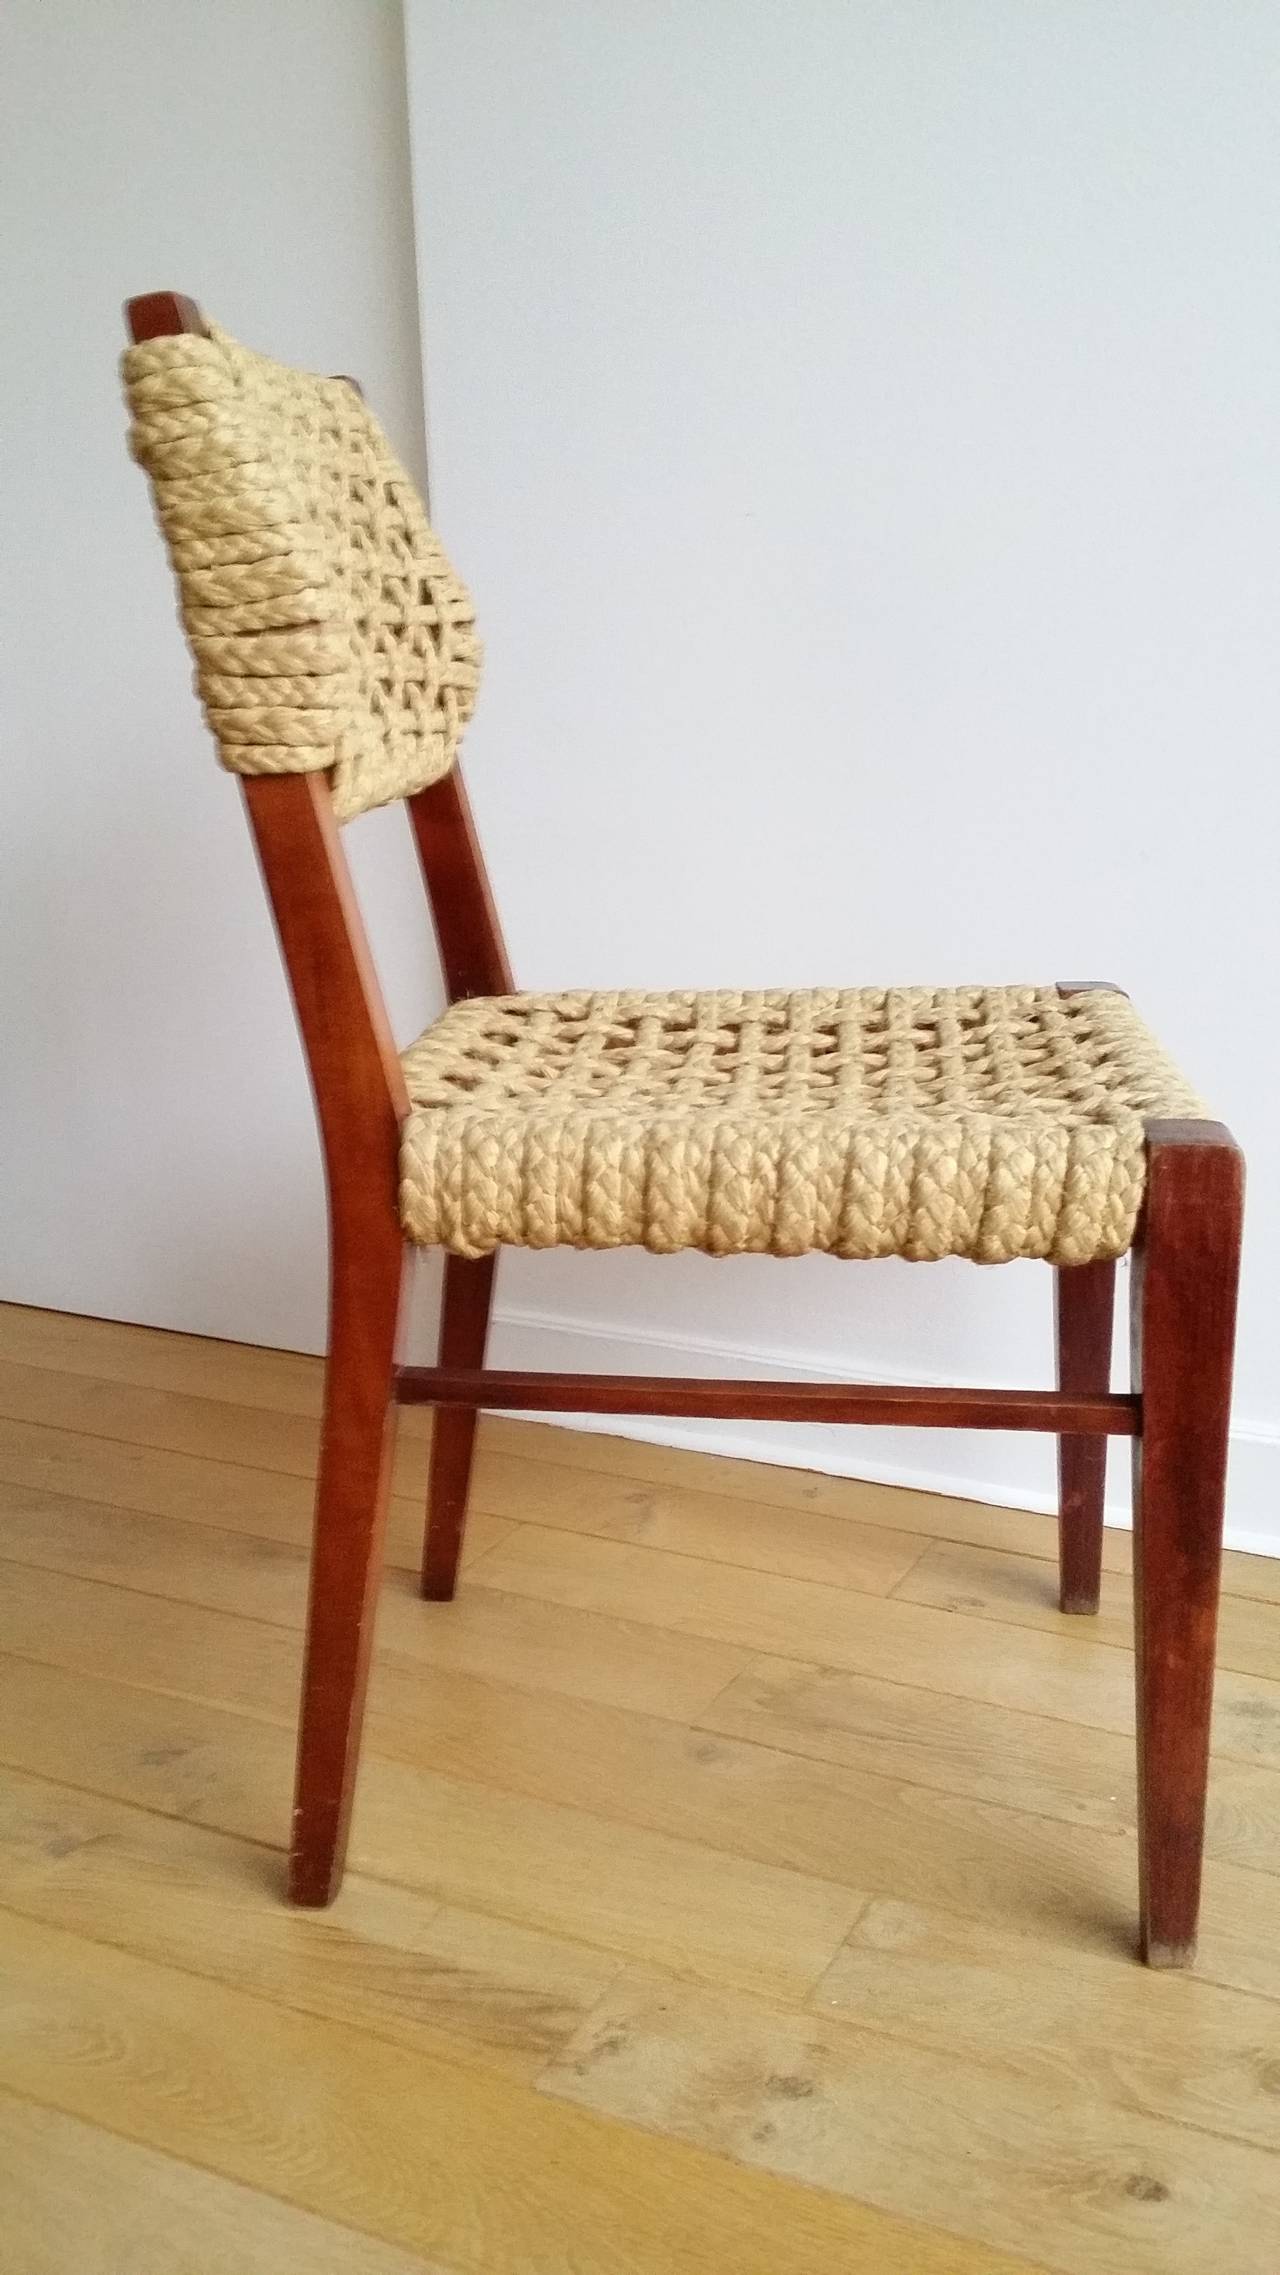 Mid-20th Century set of 2 Audoux Minet rope dining chairs - France 1960's - Ipso Facto